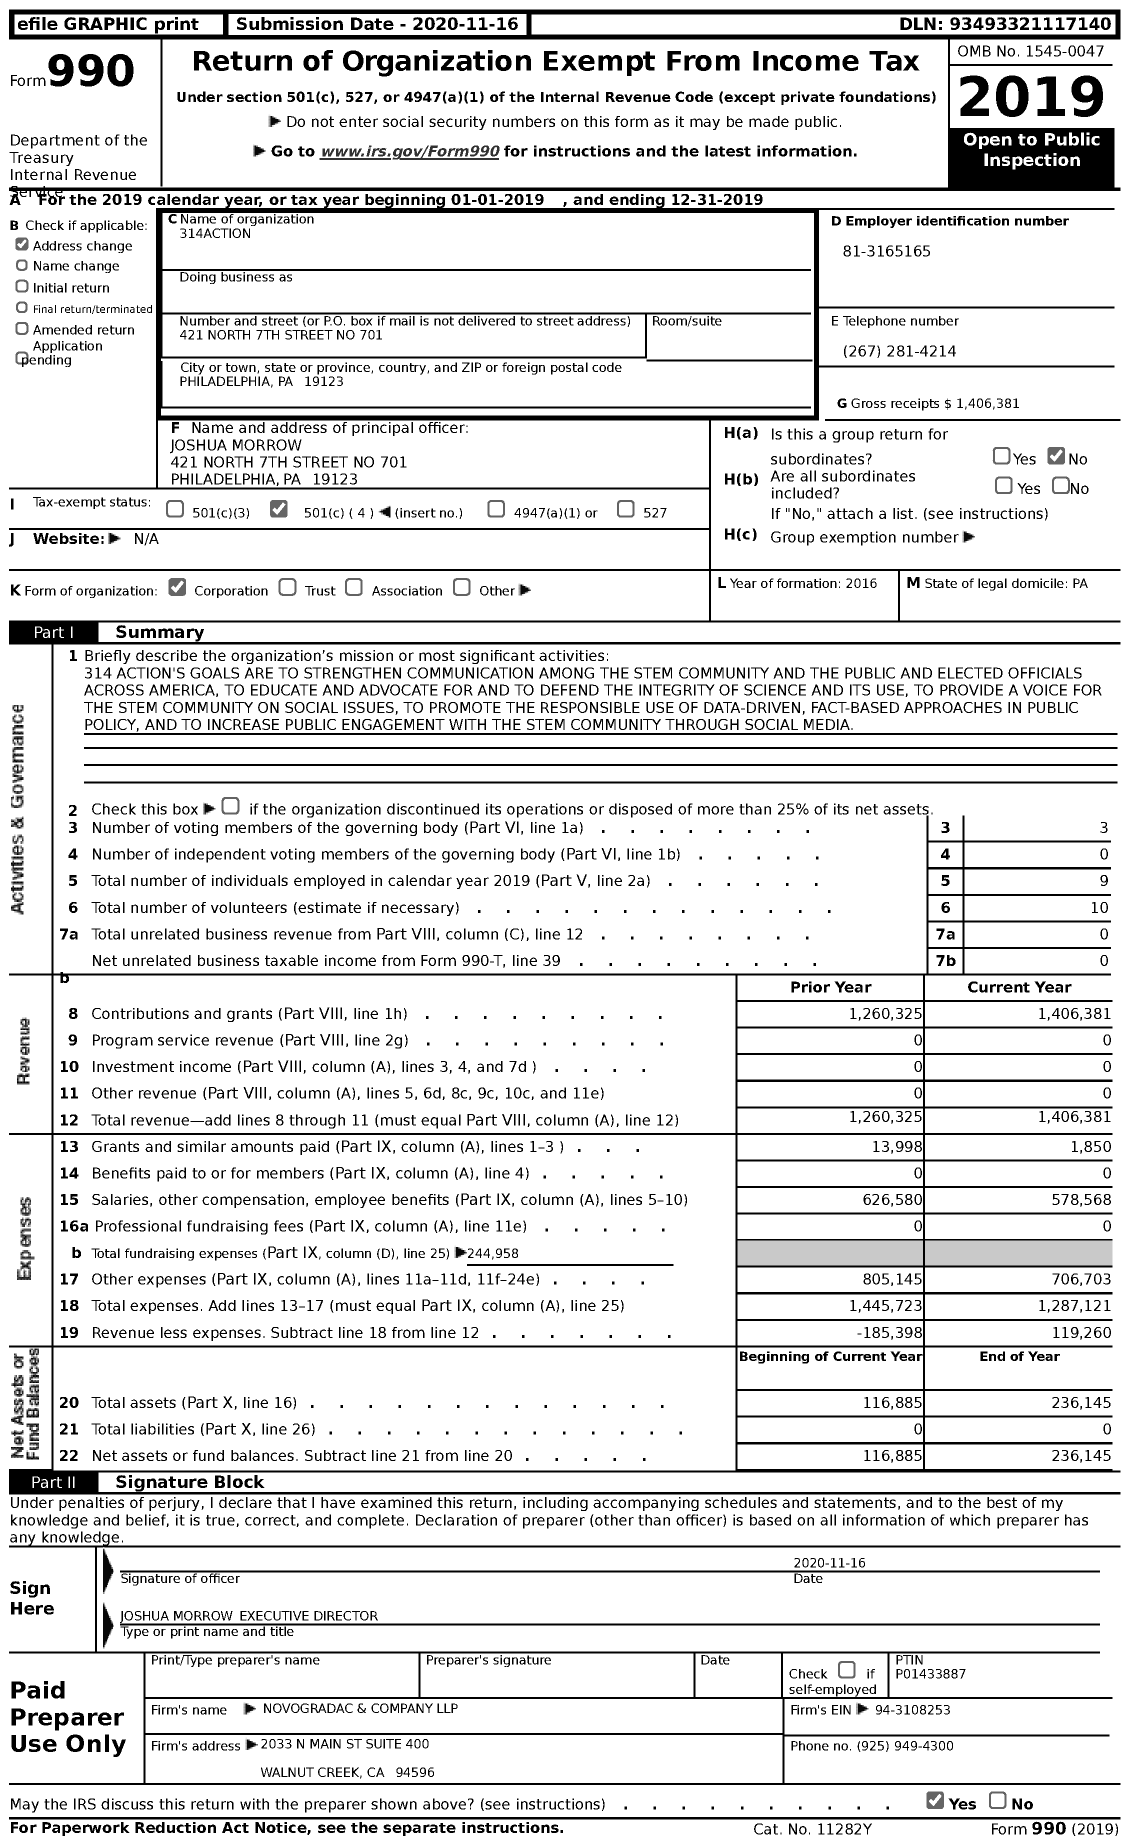 Image of first page of 2019 Form 990 for 314action